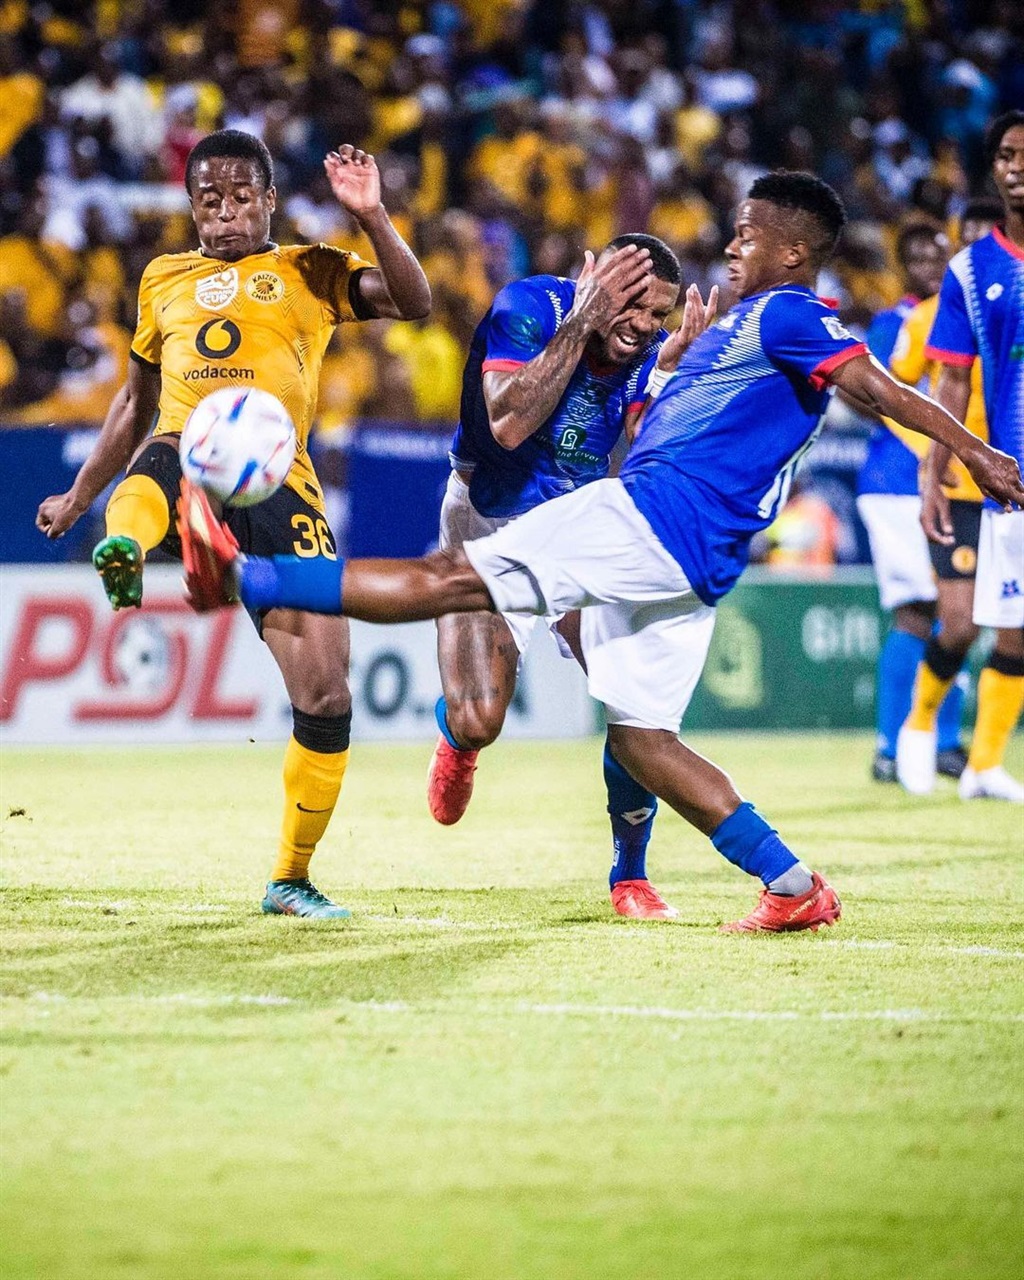 Kaizer Chiefs advanced to the Round of 16 of the Nedbank Cup after a 2-0 (AET) win over Martizburg United.